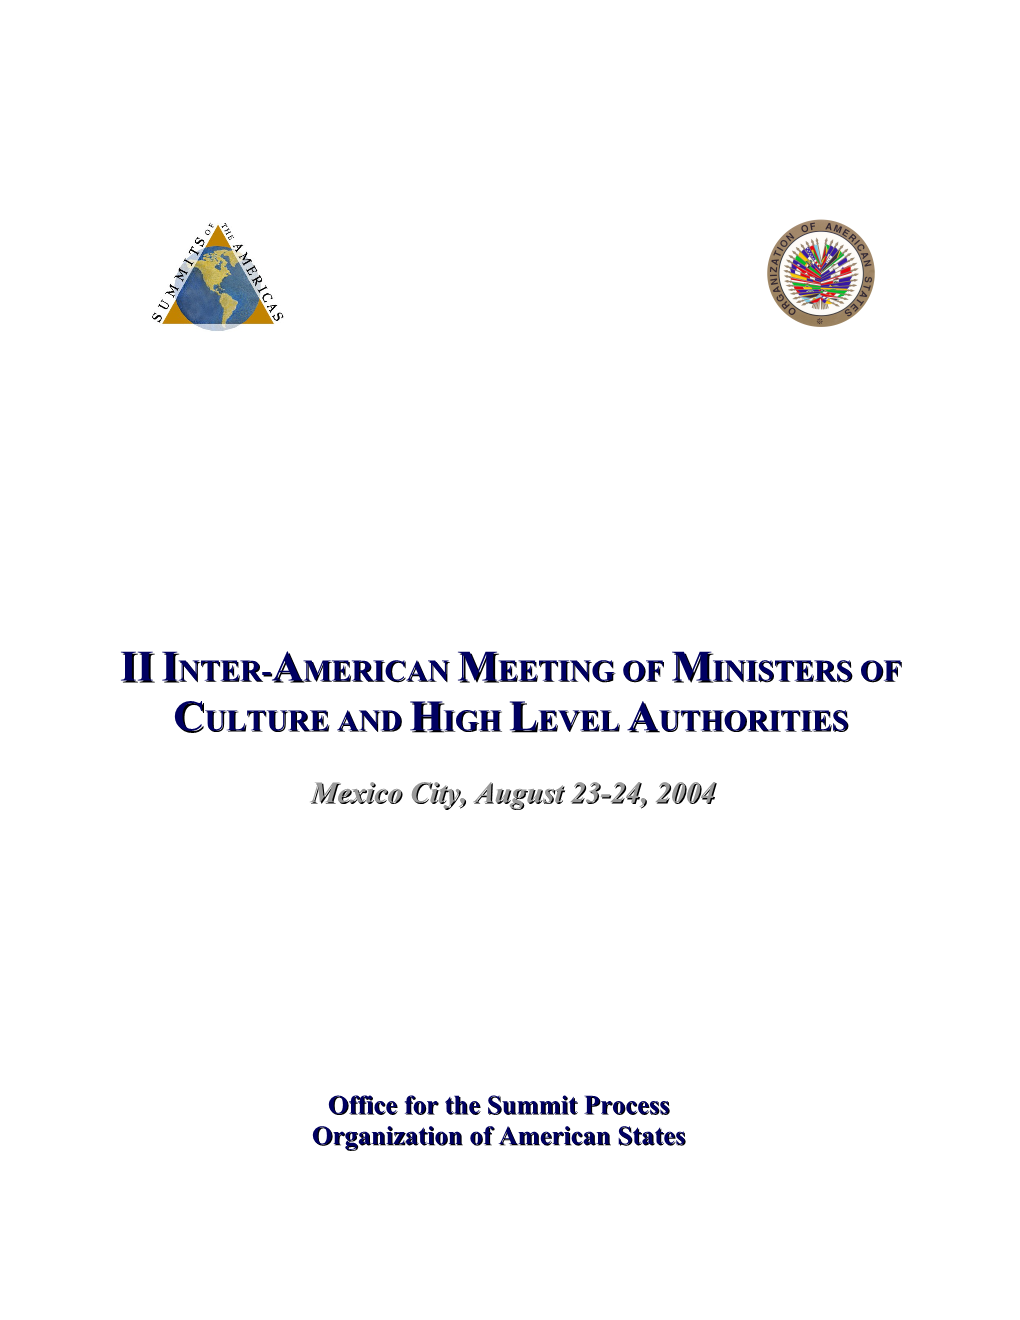 Summary of II Inter-American Meeting of Ministers of Culture and Highest Appropriate Authorities